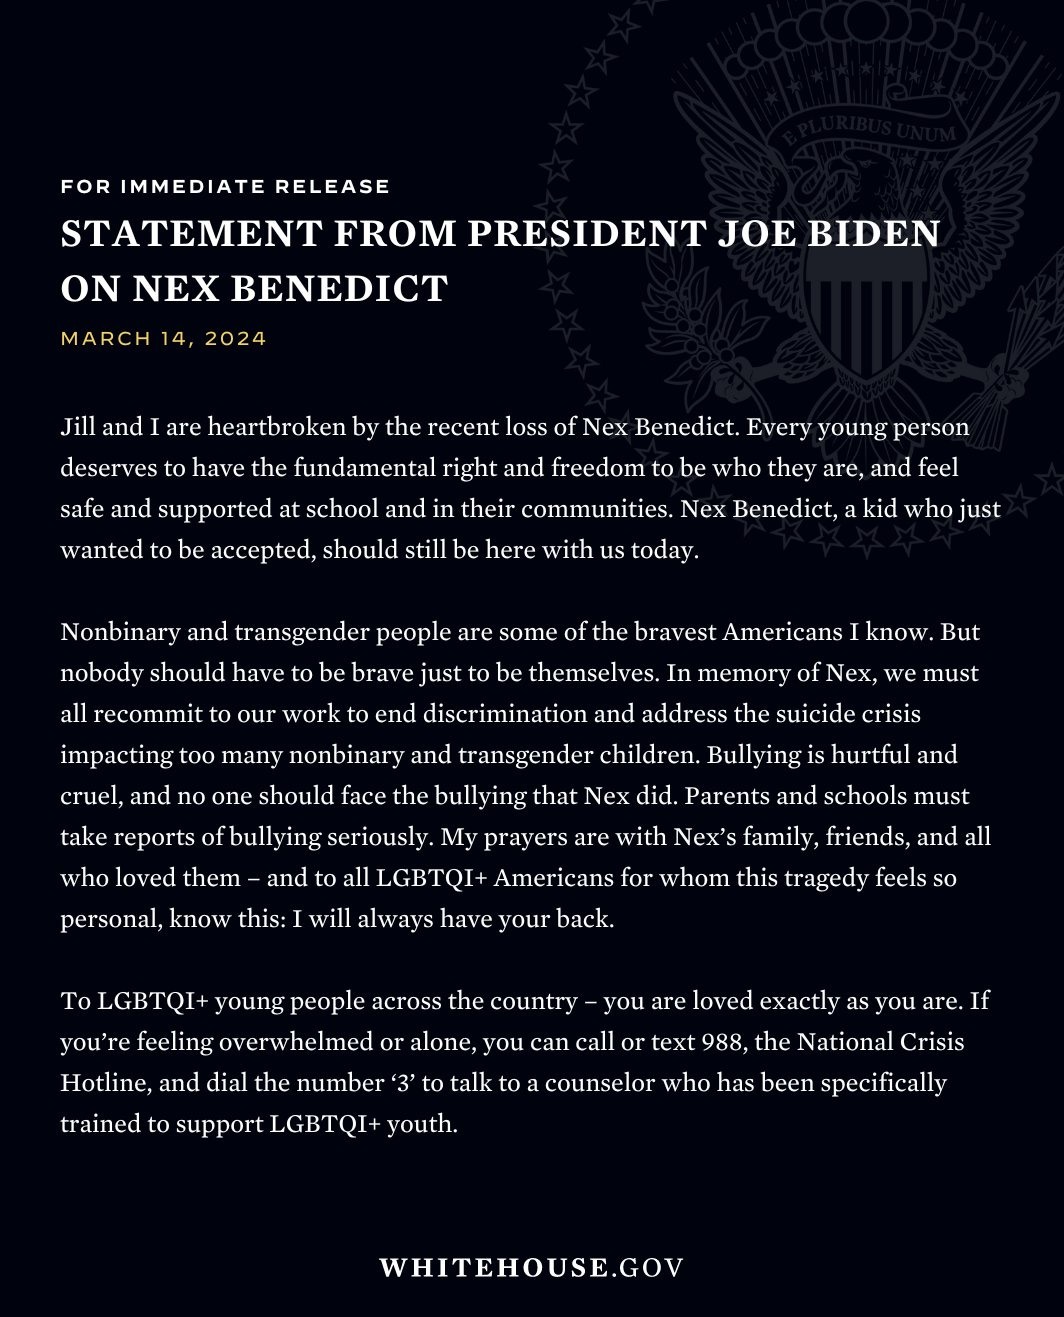 FOR IMMEDIATE RELEASE  STATEMENT FROM PRESIDENT JOE BIDEN ON NEX BENEDICT MARCH 14, 2024  Jill and I are heartbroken by the recent loss of Nex Benedict. Every young person deserves to have the fundamental right and freedom to be who they are, and feel safe and supported at school and in their communities. Nex Benedict, a kid who just wanted to be accepted, should still be here with us today.  Nonbinary and transgender people are some of the bravest Americans I know. But nobody should have to be brave just to be themselves. In memory of Nex, we must all recommit to our work to end discrimination and address the suicide crisis impacting too many nonbinary and transgender children. Bullying is hurtful and cruel, and no one should face the bullying that Nex did. Parents and schools must take reports of bullying seriously. My prayers are with Nex's family, friends, and all who loved them – and to all LGBTQI+ Americans for whom this tragedy feels so personal, know this: I will always have your back.  To LGBTQI+ young people across the country – you are loved exactly as you are. If you're feeling overwhelmed or alone, you can call or text 988, the National Crisis Hotline, and dial the number '3' to talk to a counselor who has been specifically trained to support LGBTQI+ youth.  WHITEHOUSE.GOV